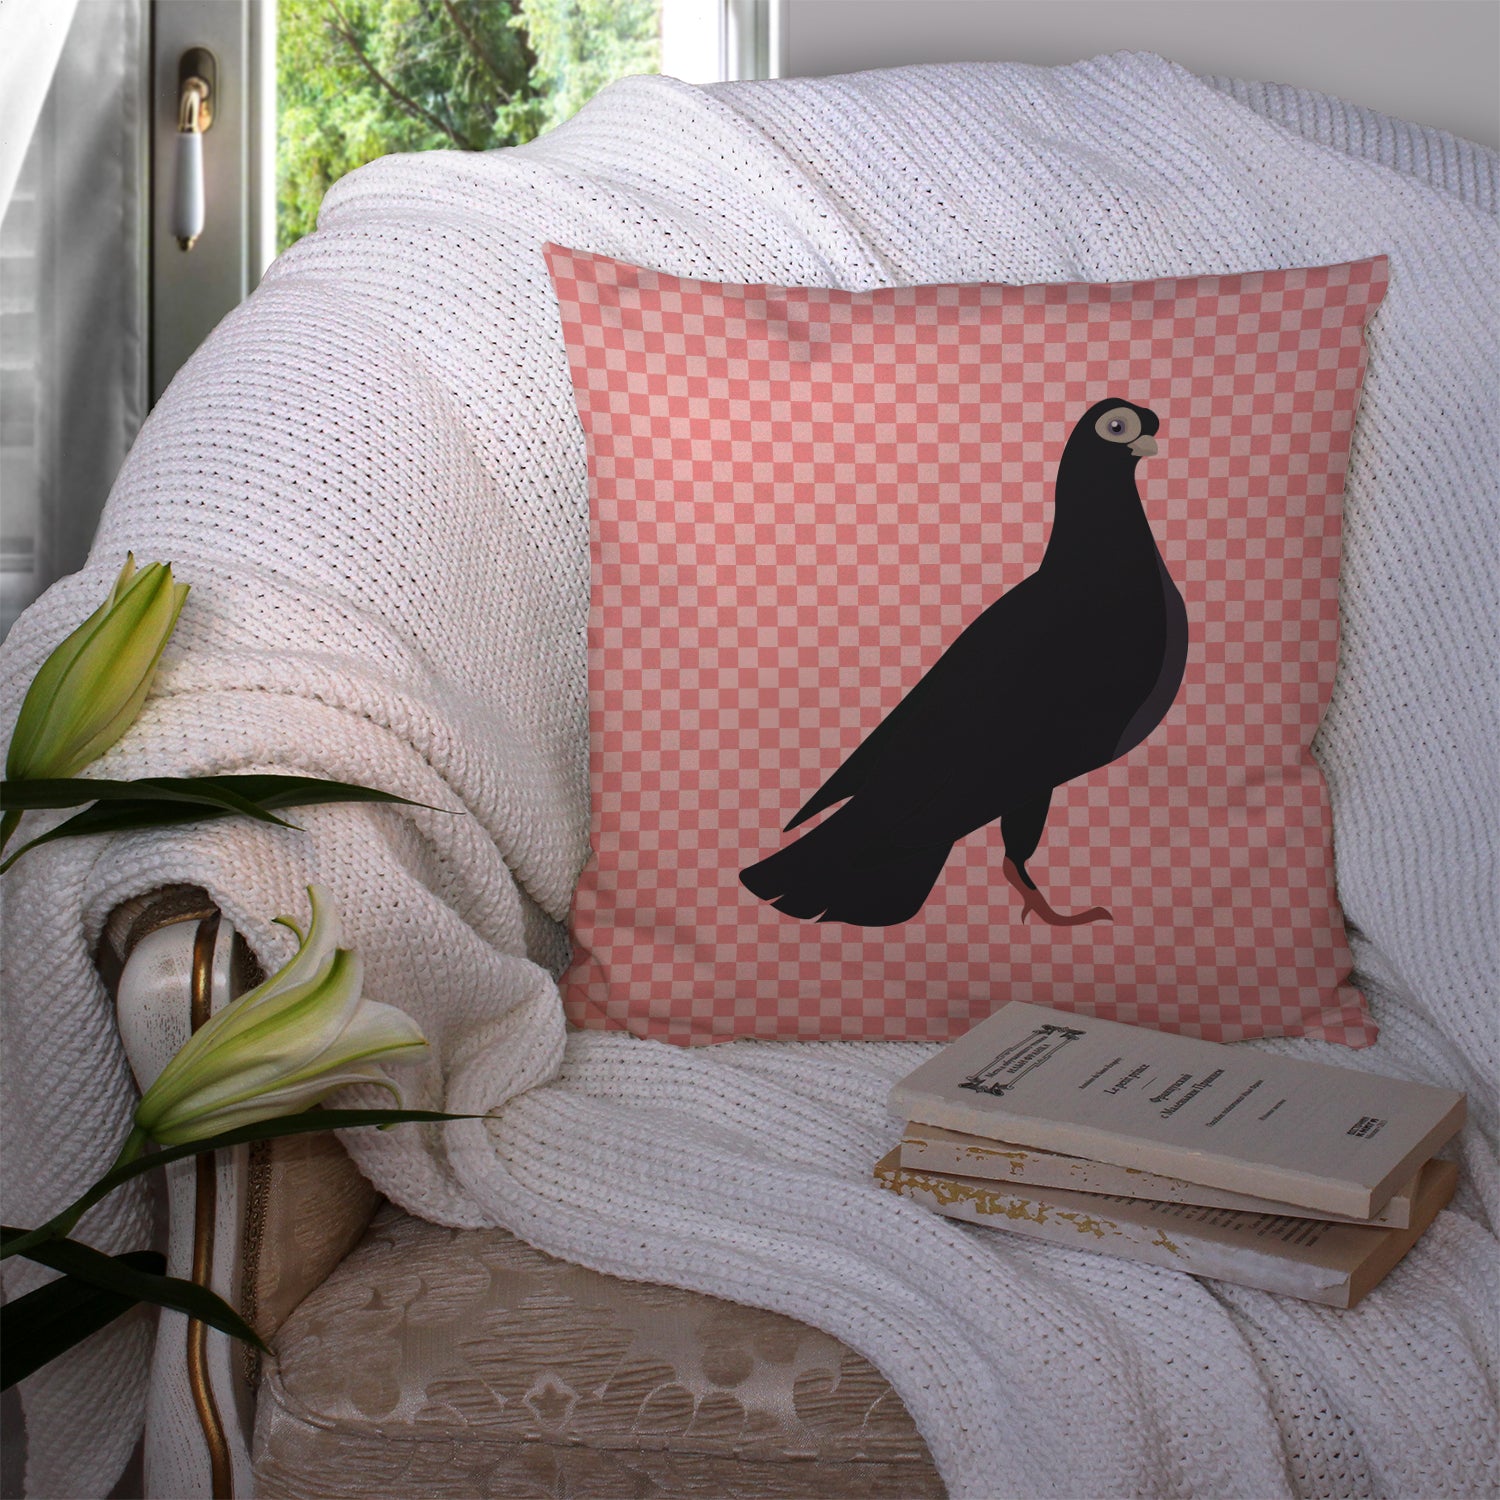 Budapest Highflyer Pigeon Pink Check Fabric Decorative Pillow BB7947PW1414 - the-store.com